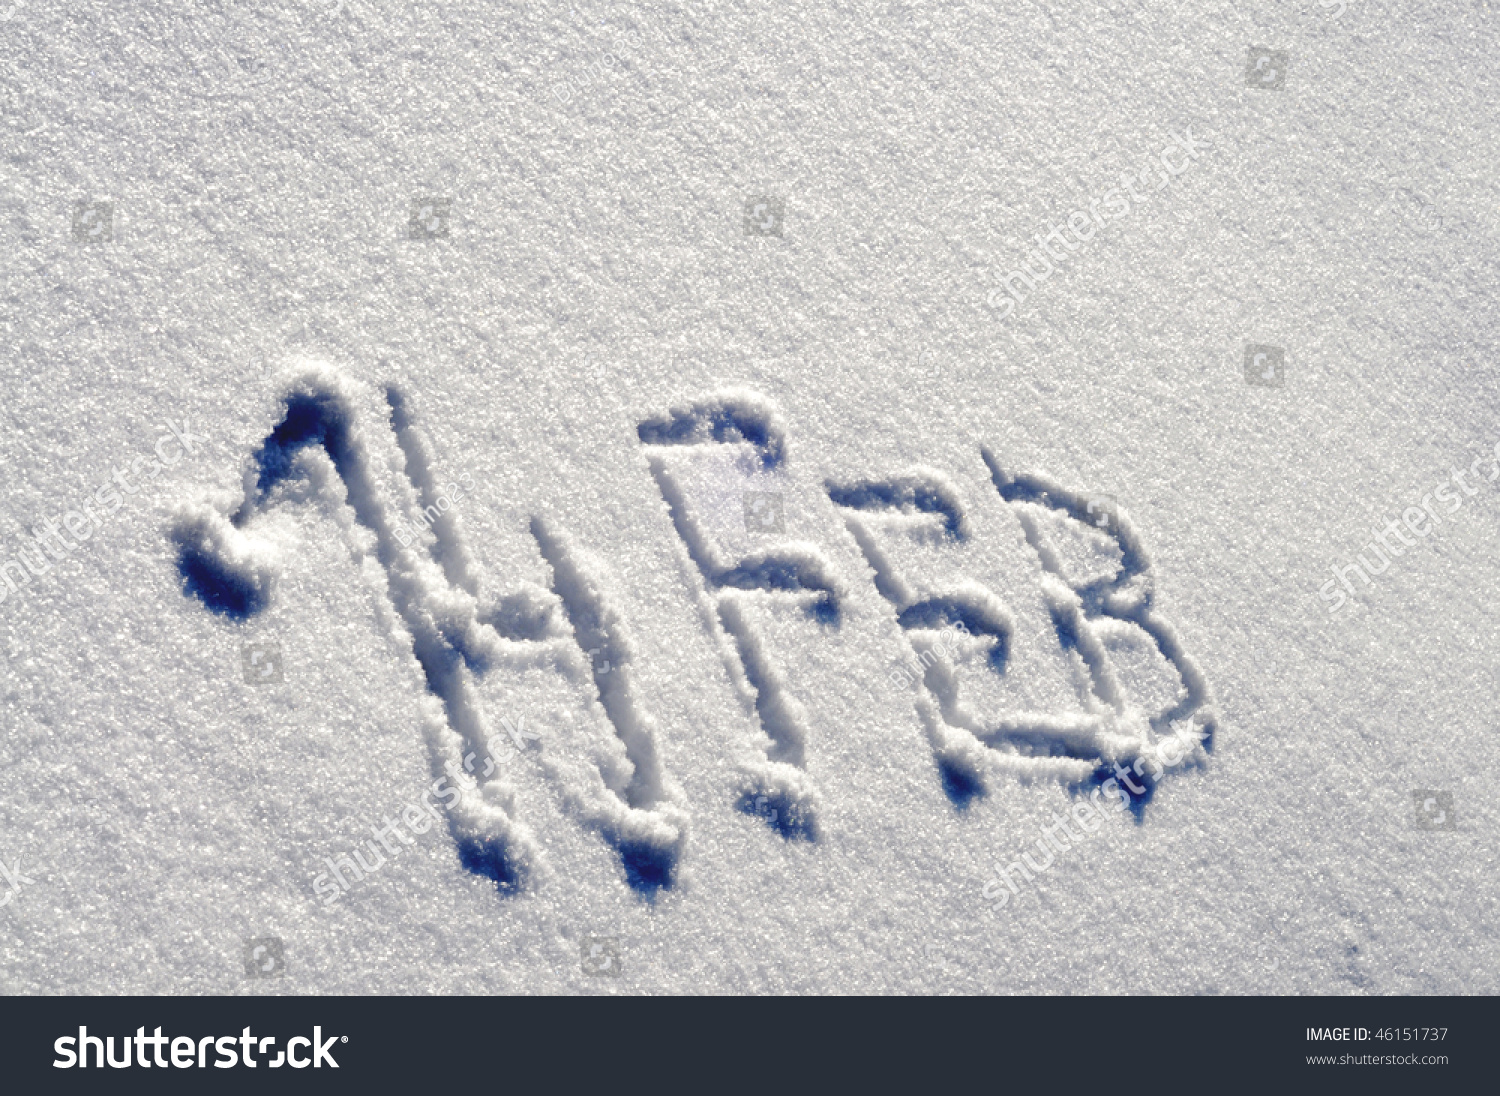 stock-photo-date-february-drawn-on-the-snow-46151737.jpg